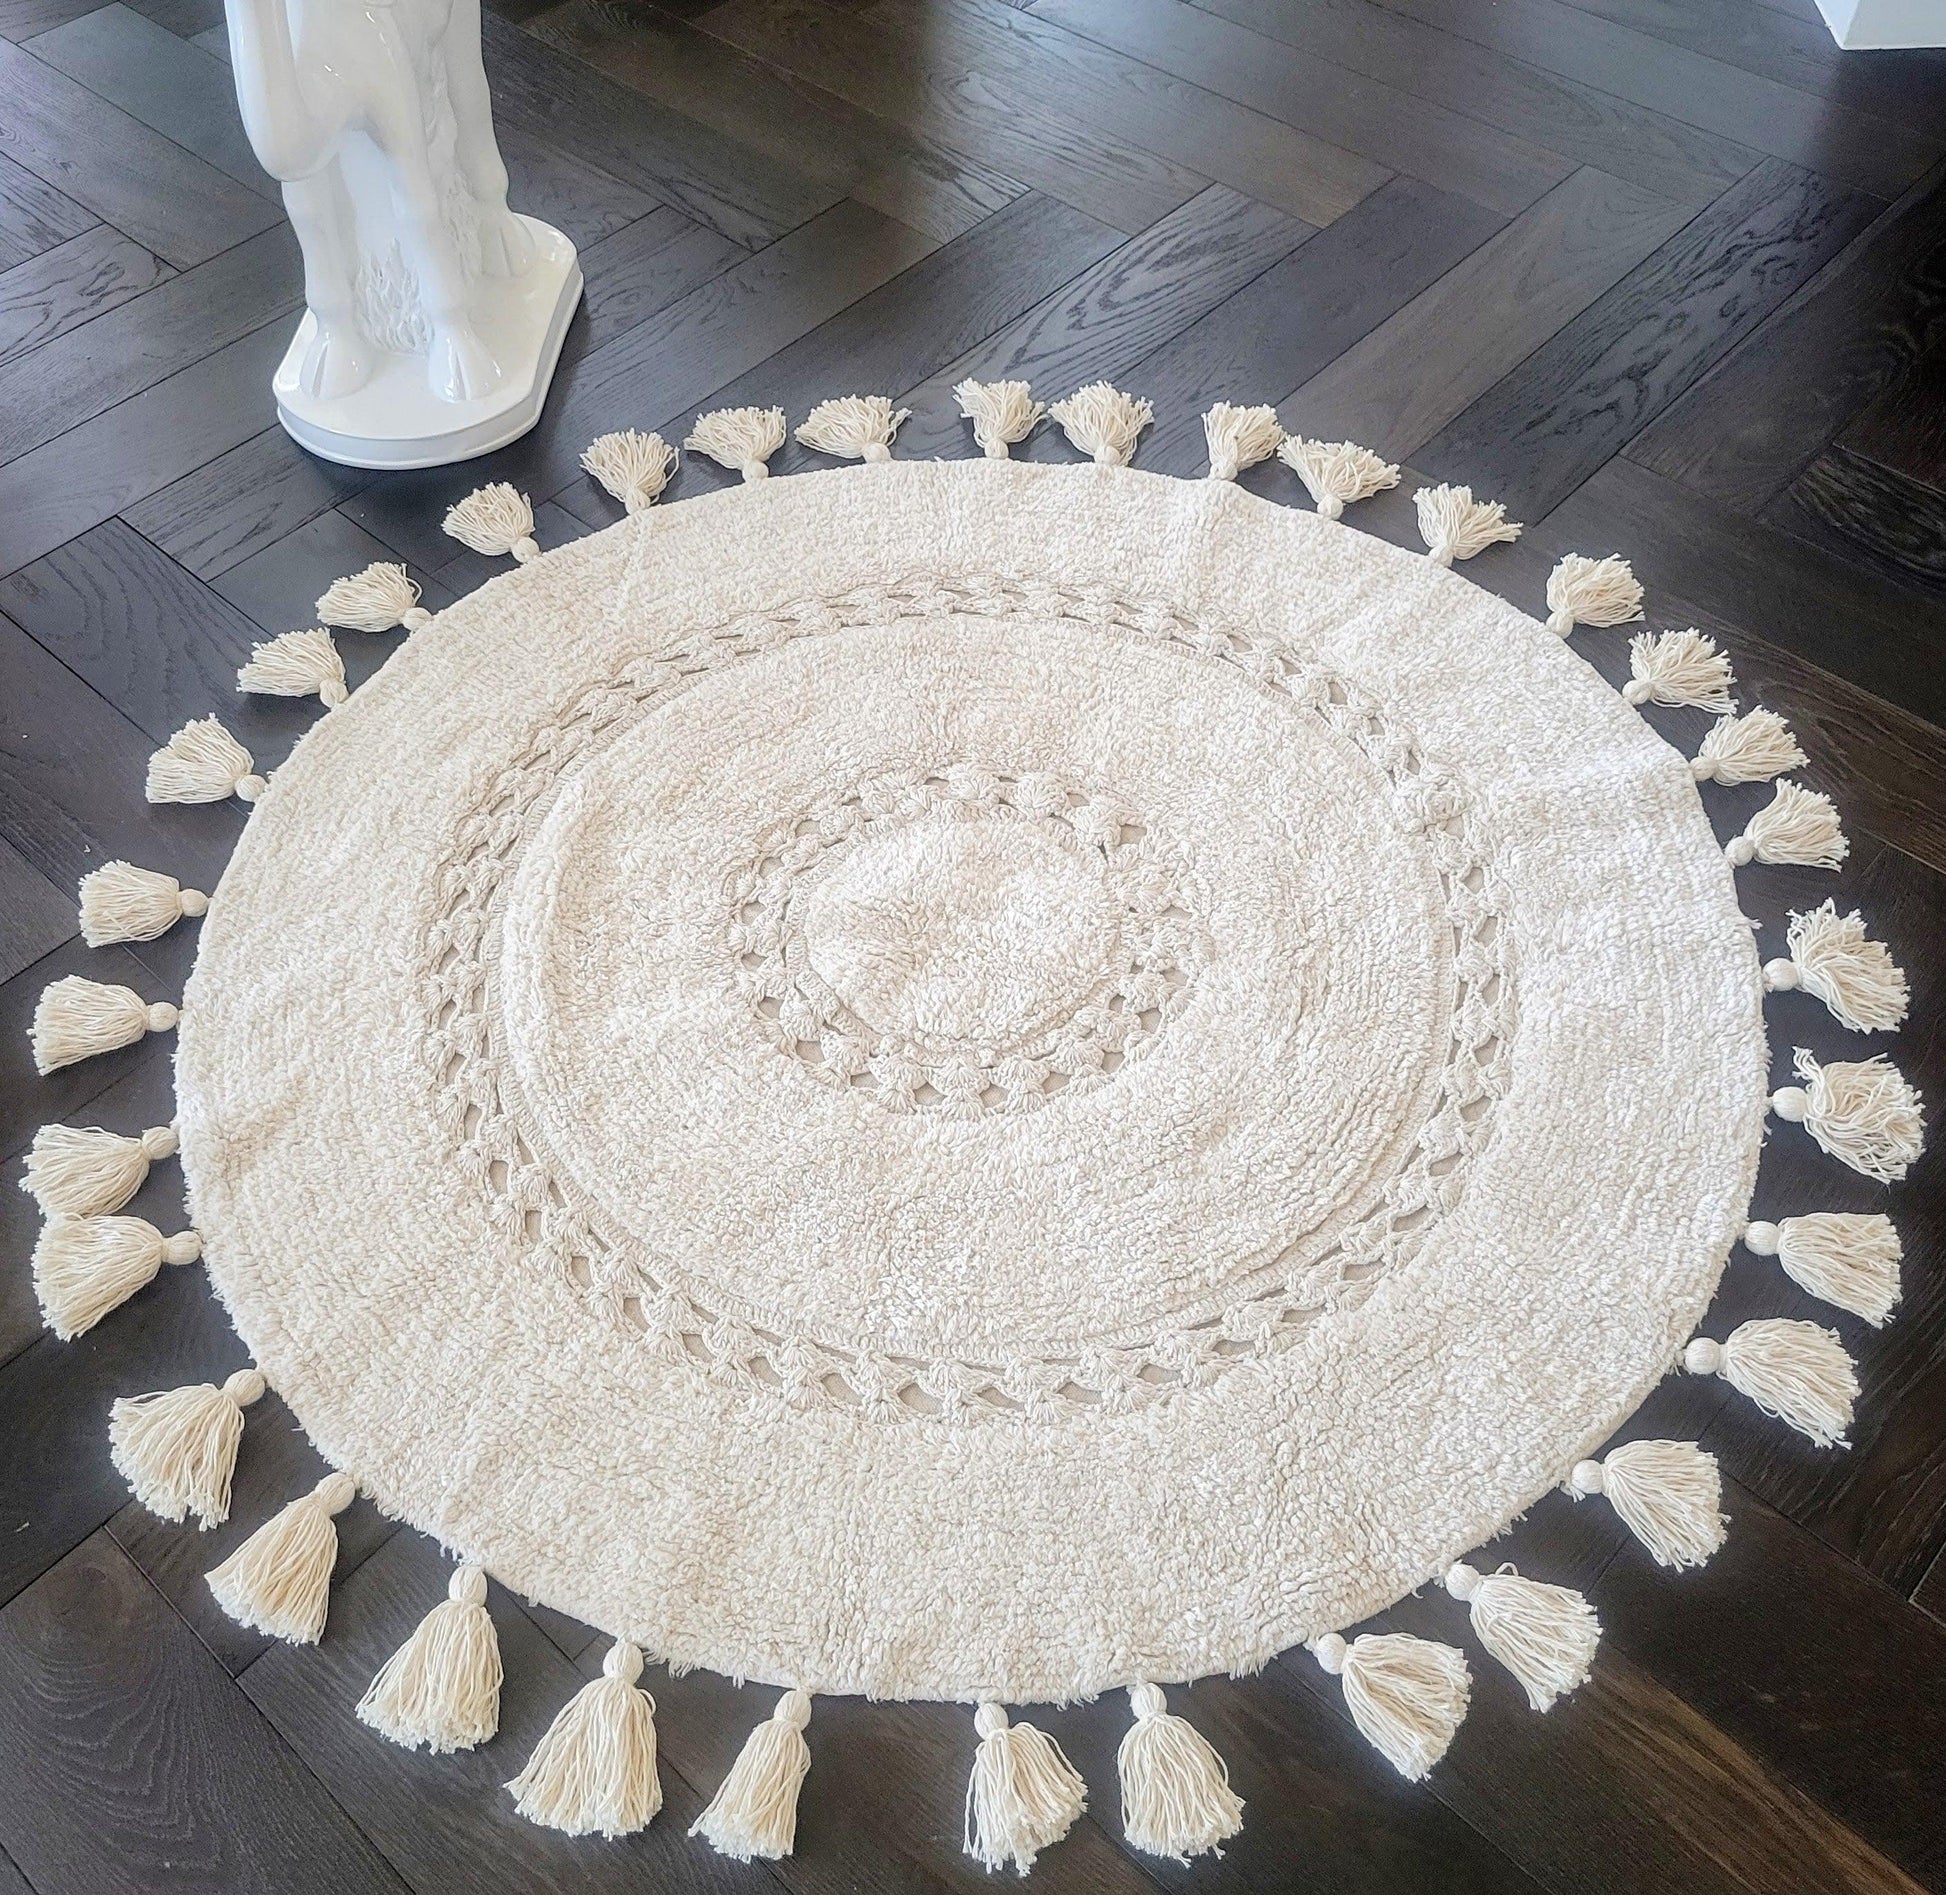 100% Non-Toxic Cotton Boho Round Crocheted Bath Rug with Tassels - Extra Large - MAIA HOMES